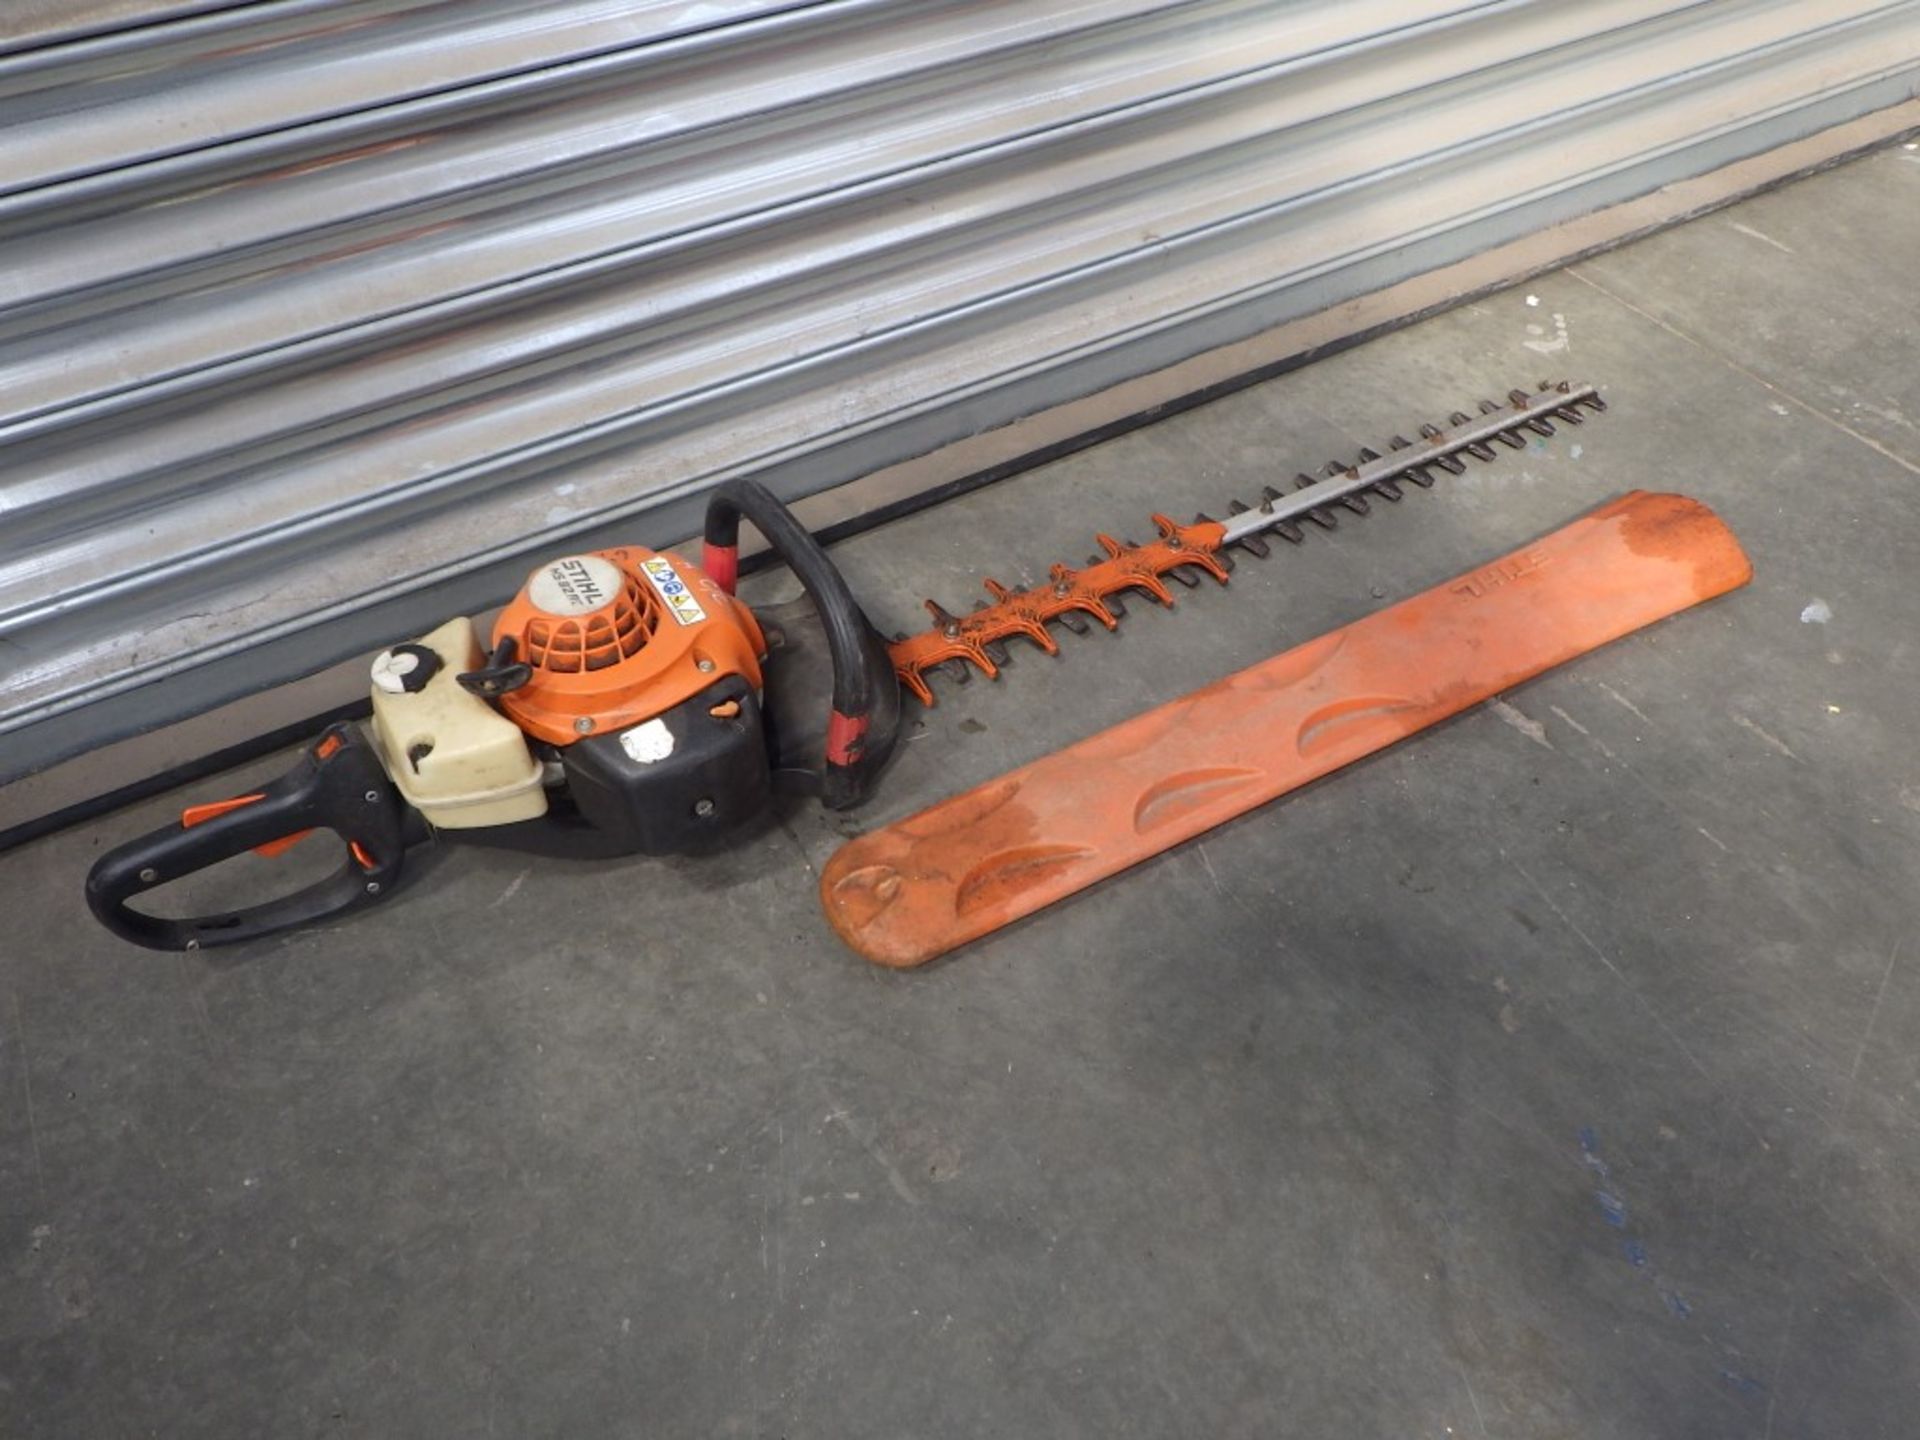 Stihl HS 82RC Petrol Hedge Trimmer - Image 3 of 7